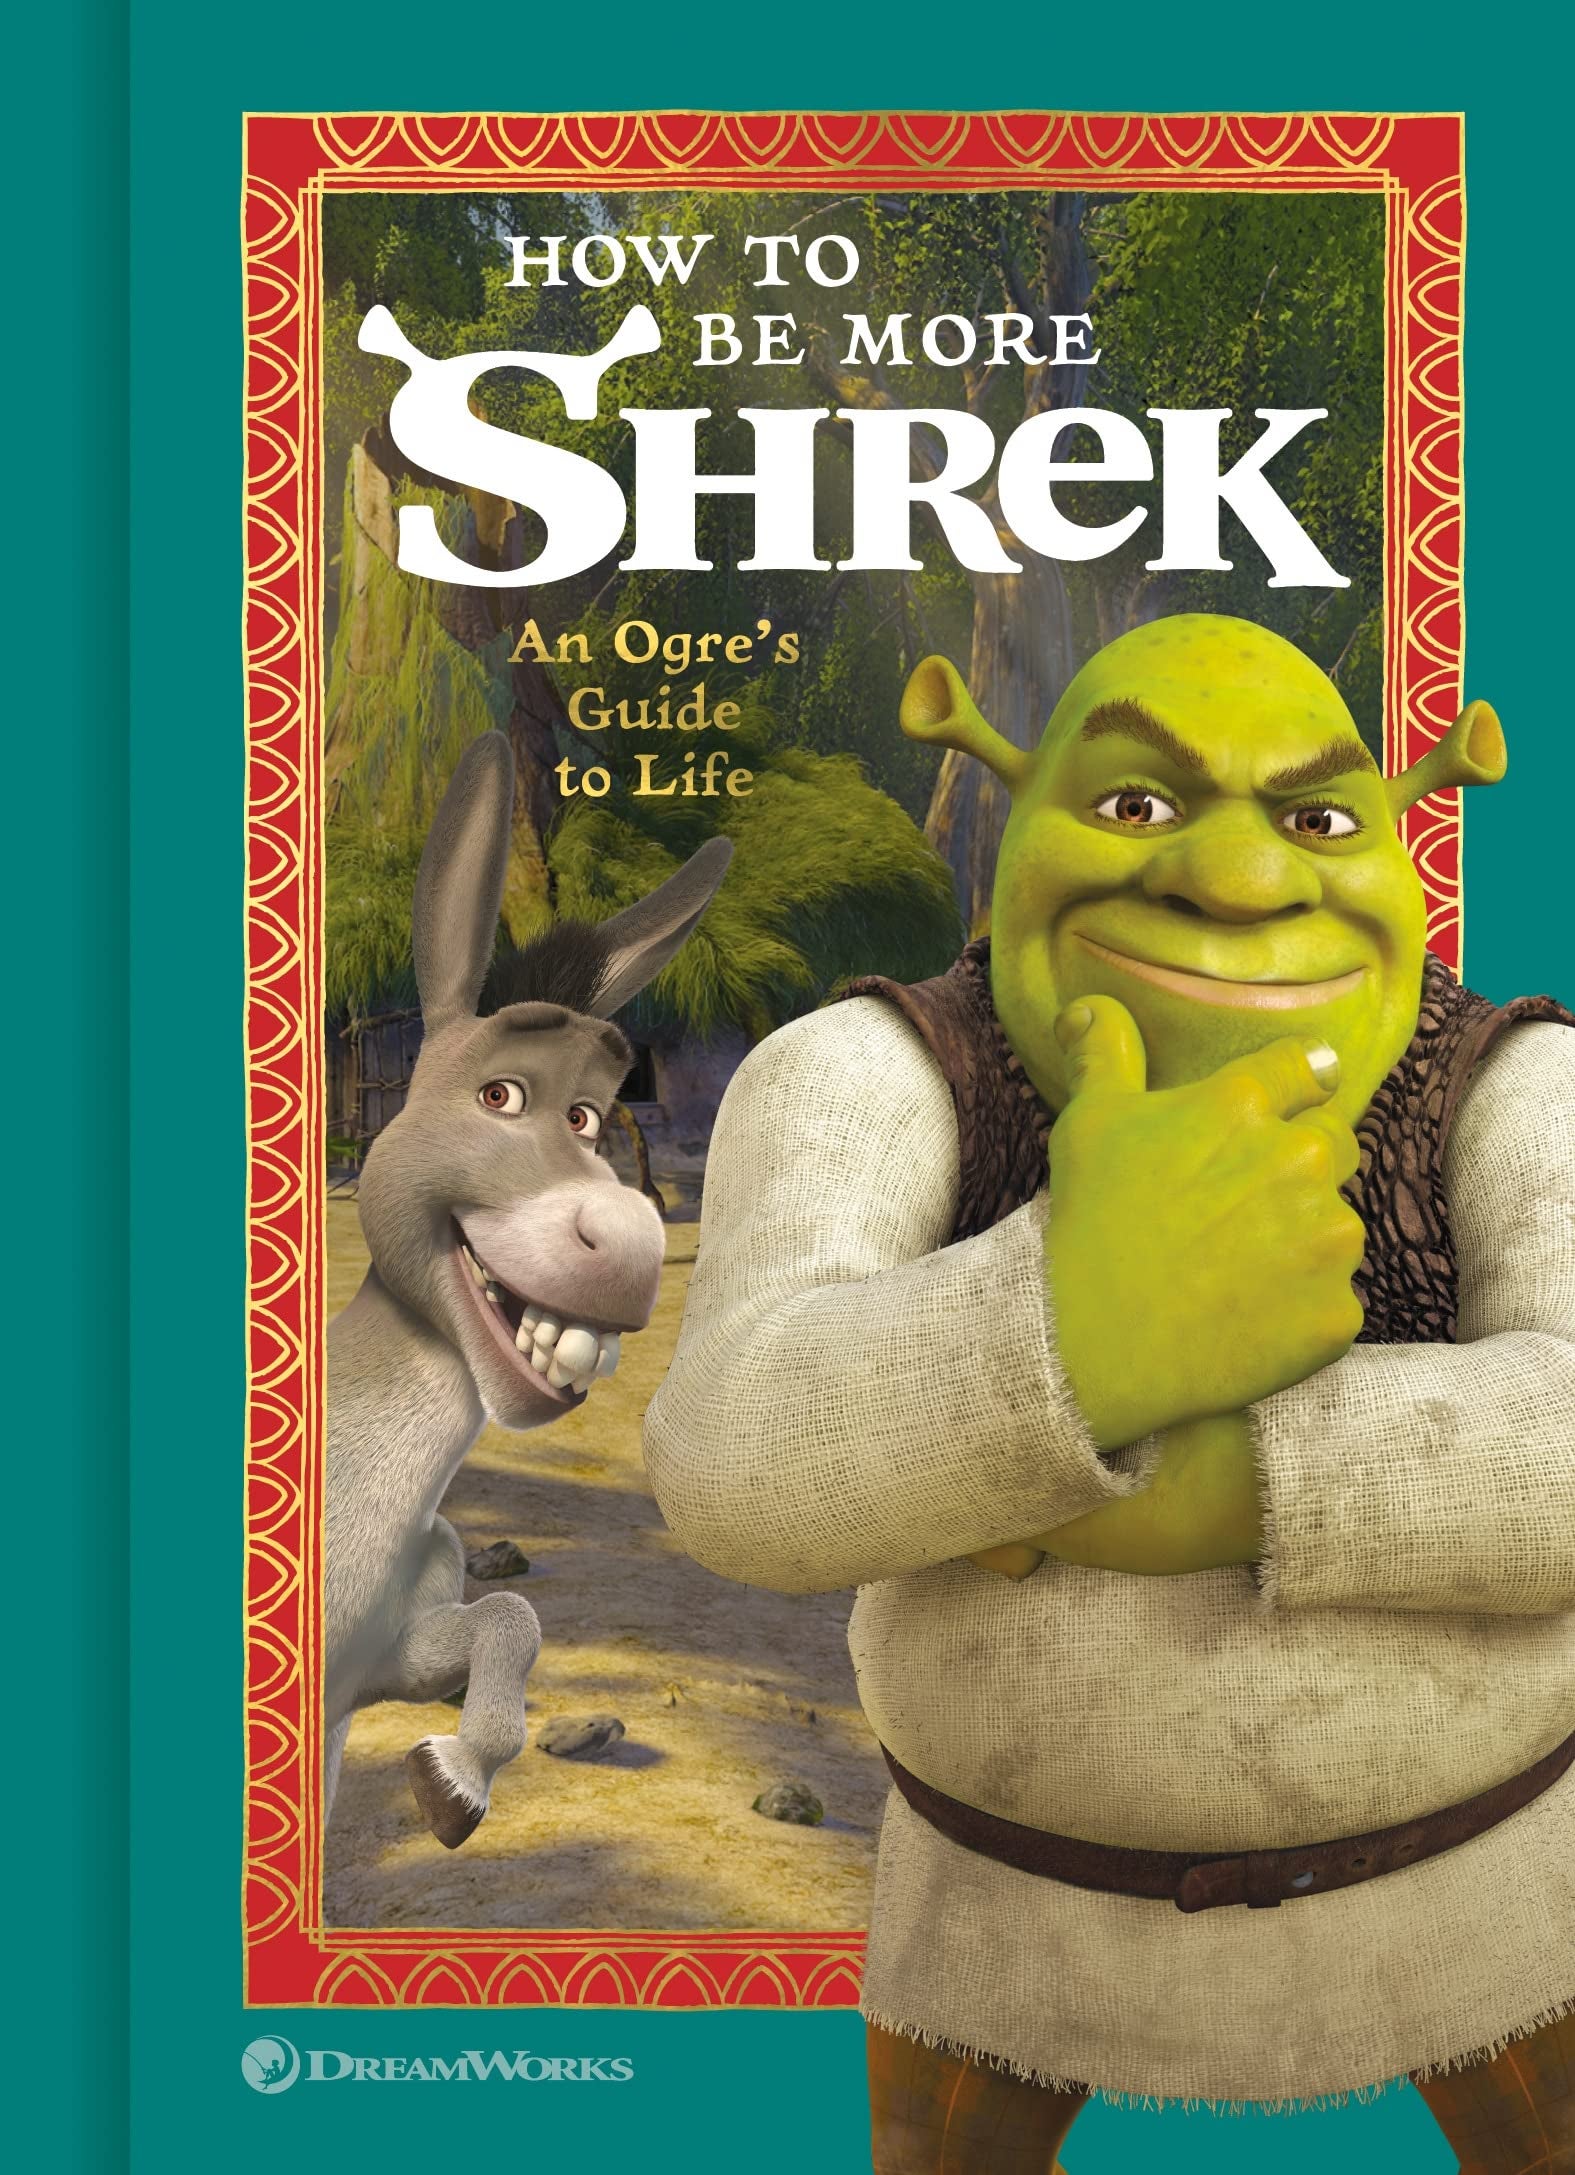 The cover of the book with Shrek and Donkey on it 